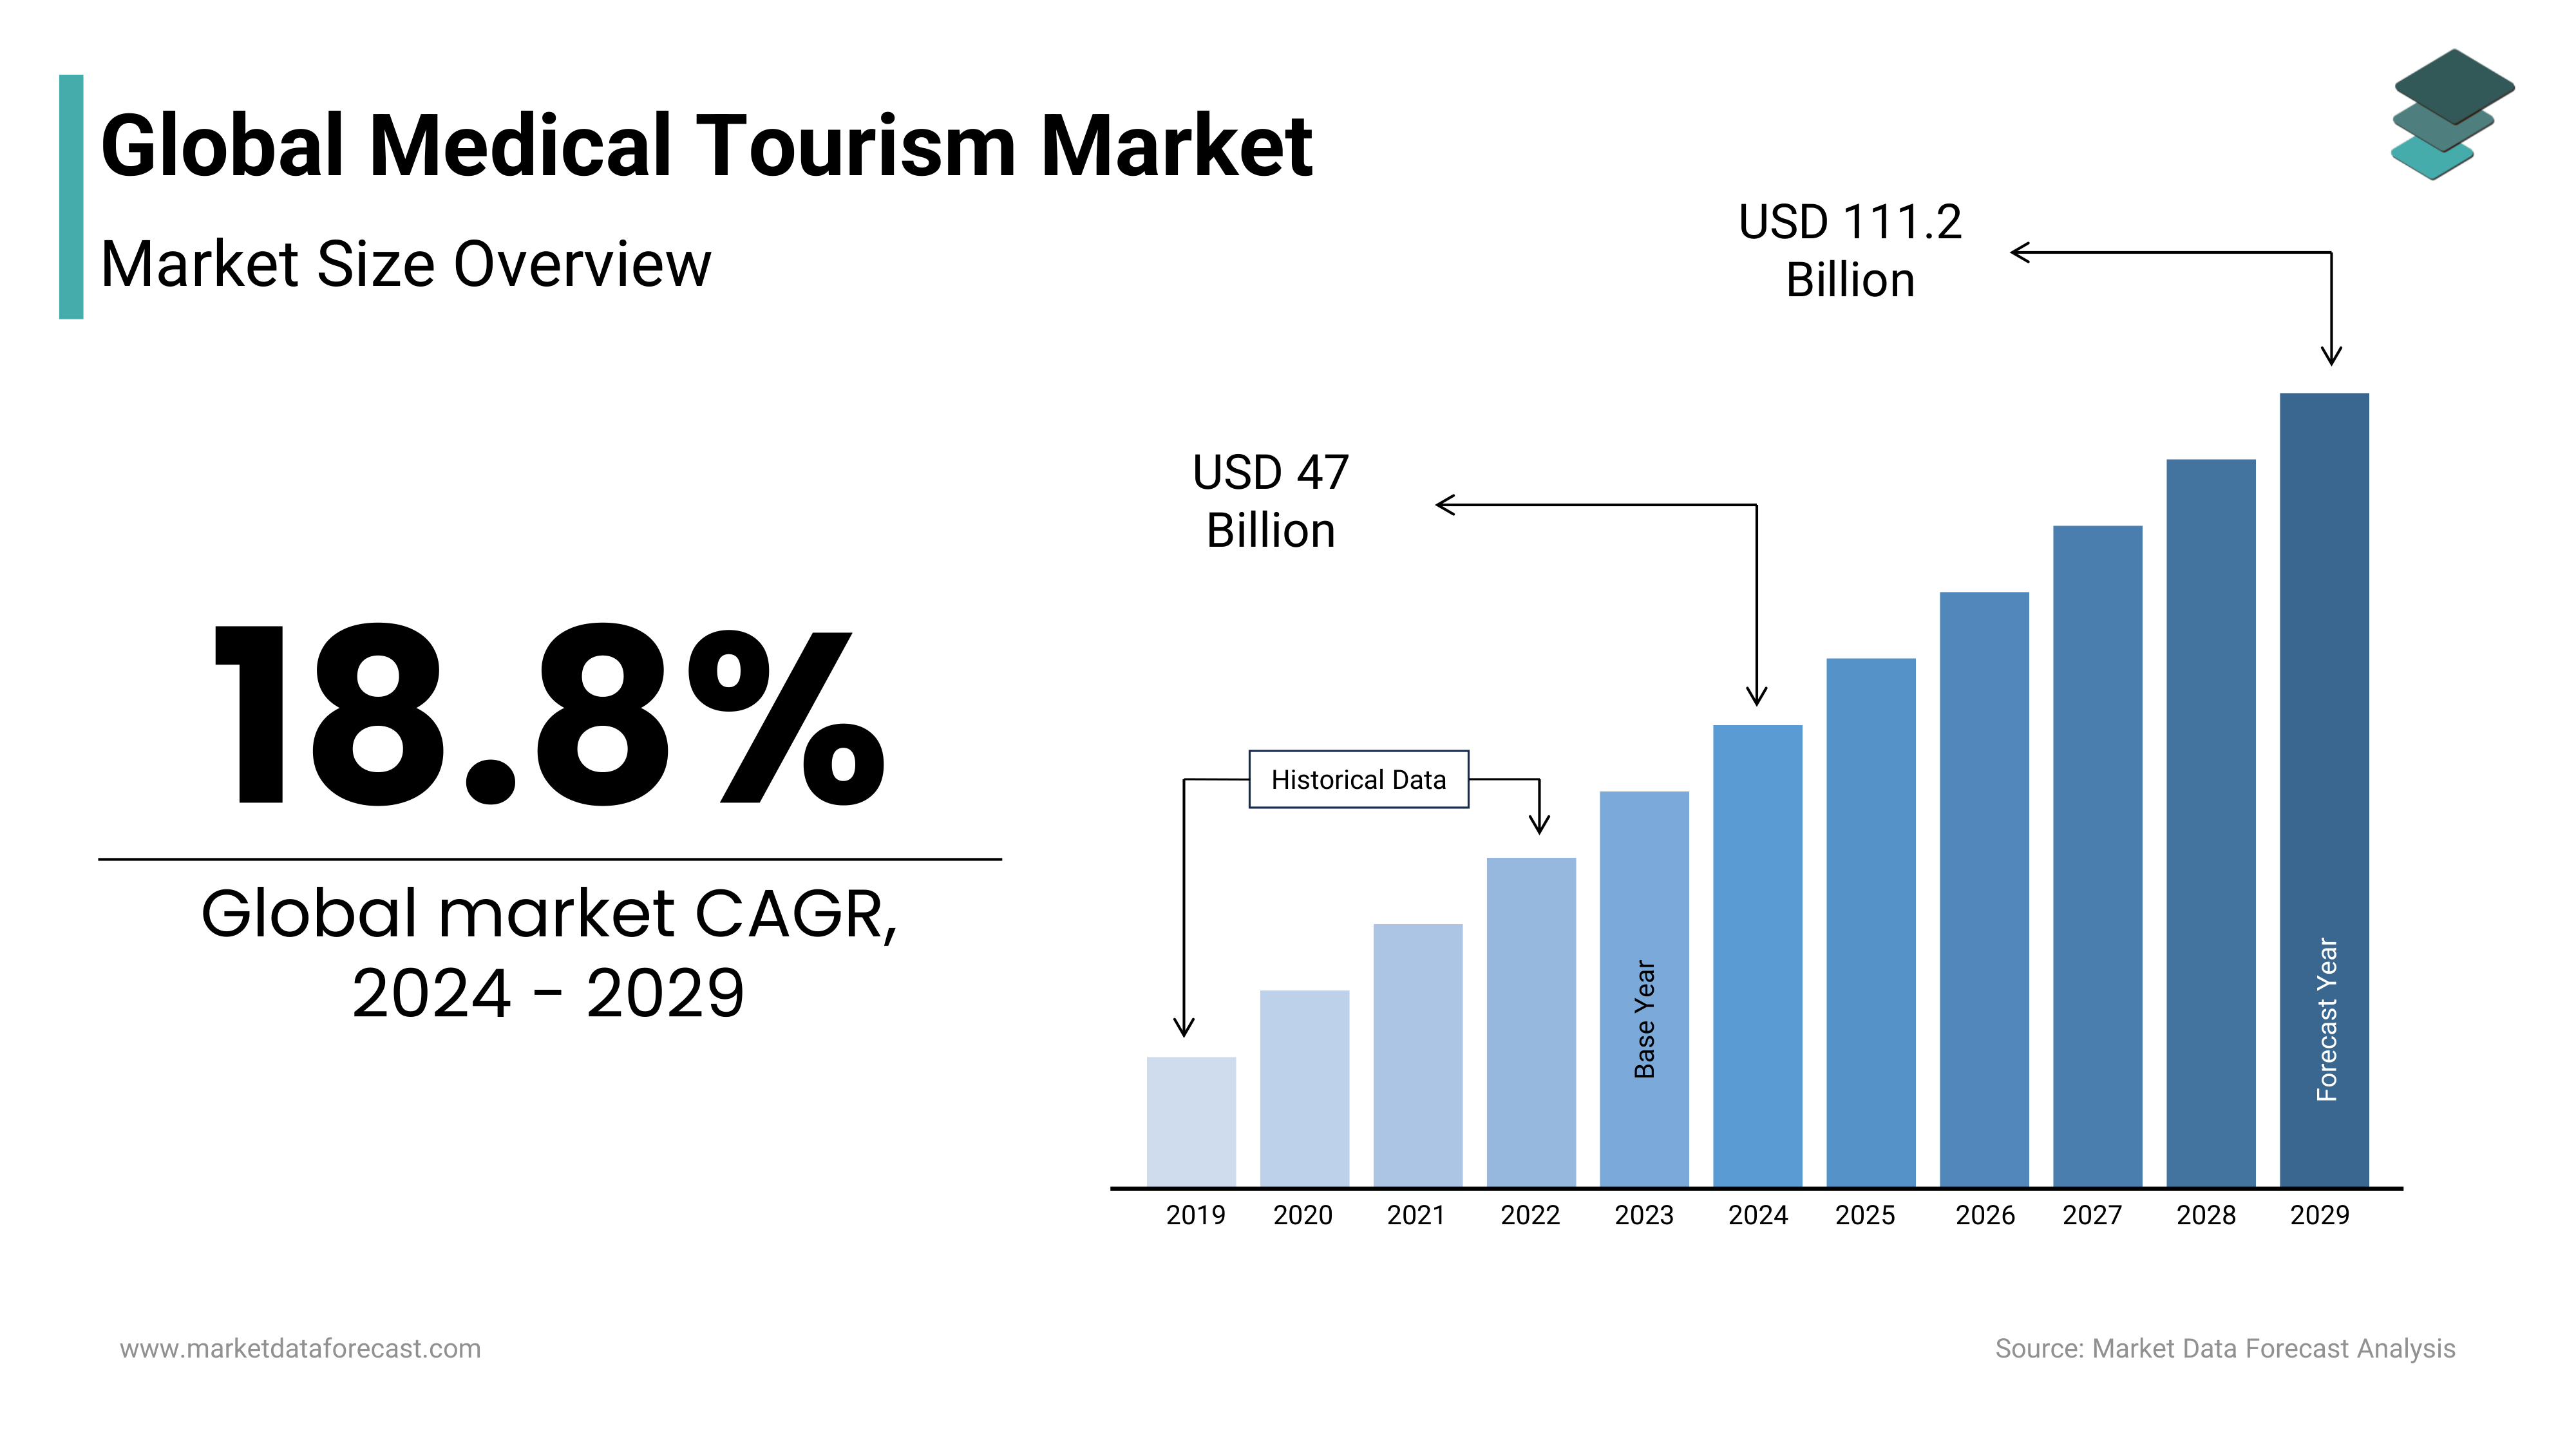 The global medical tourism market is projected to hit USD 47 billion in 2024.